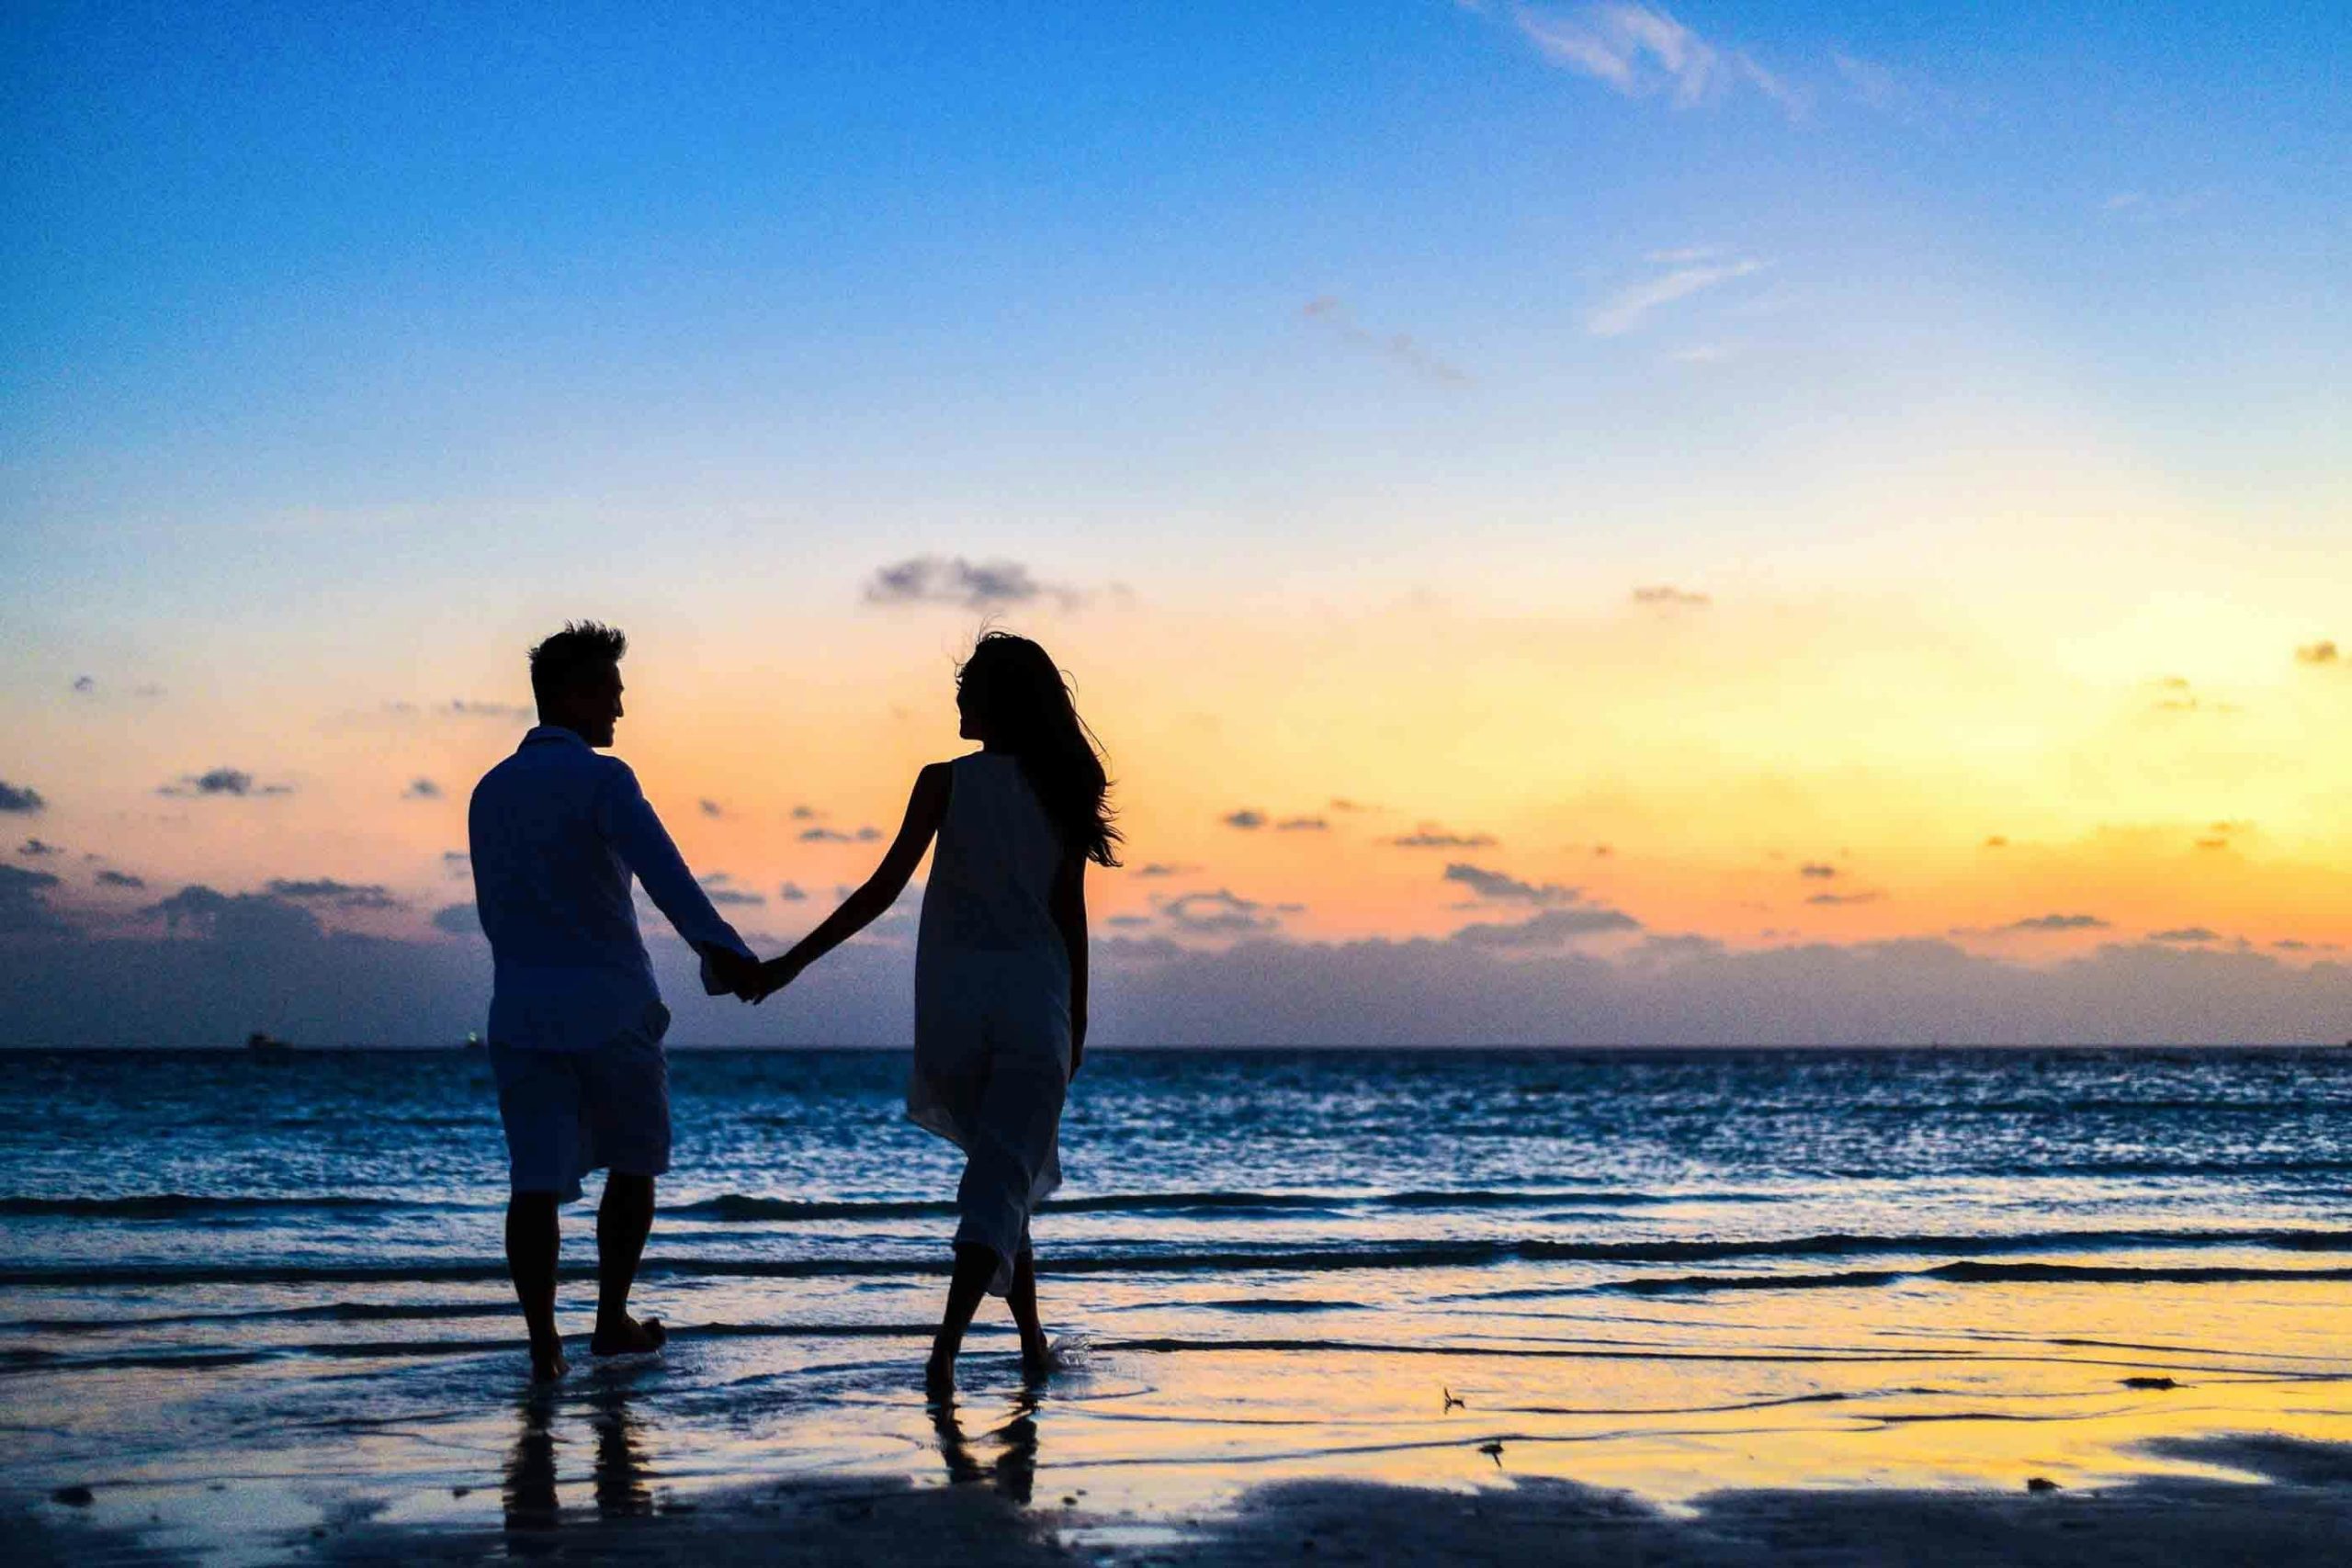 Silhouette of a couple holding hands on the beach at sunset, a romantic Seychelles honeymoon destination.